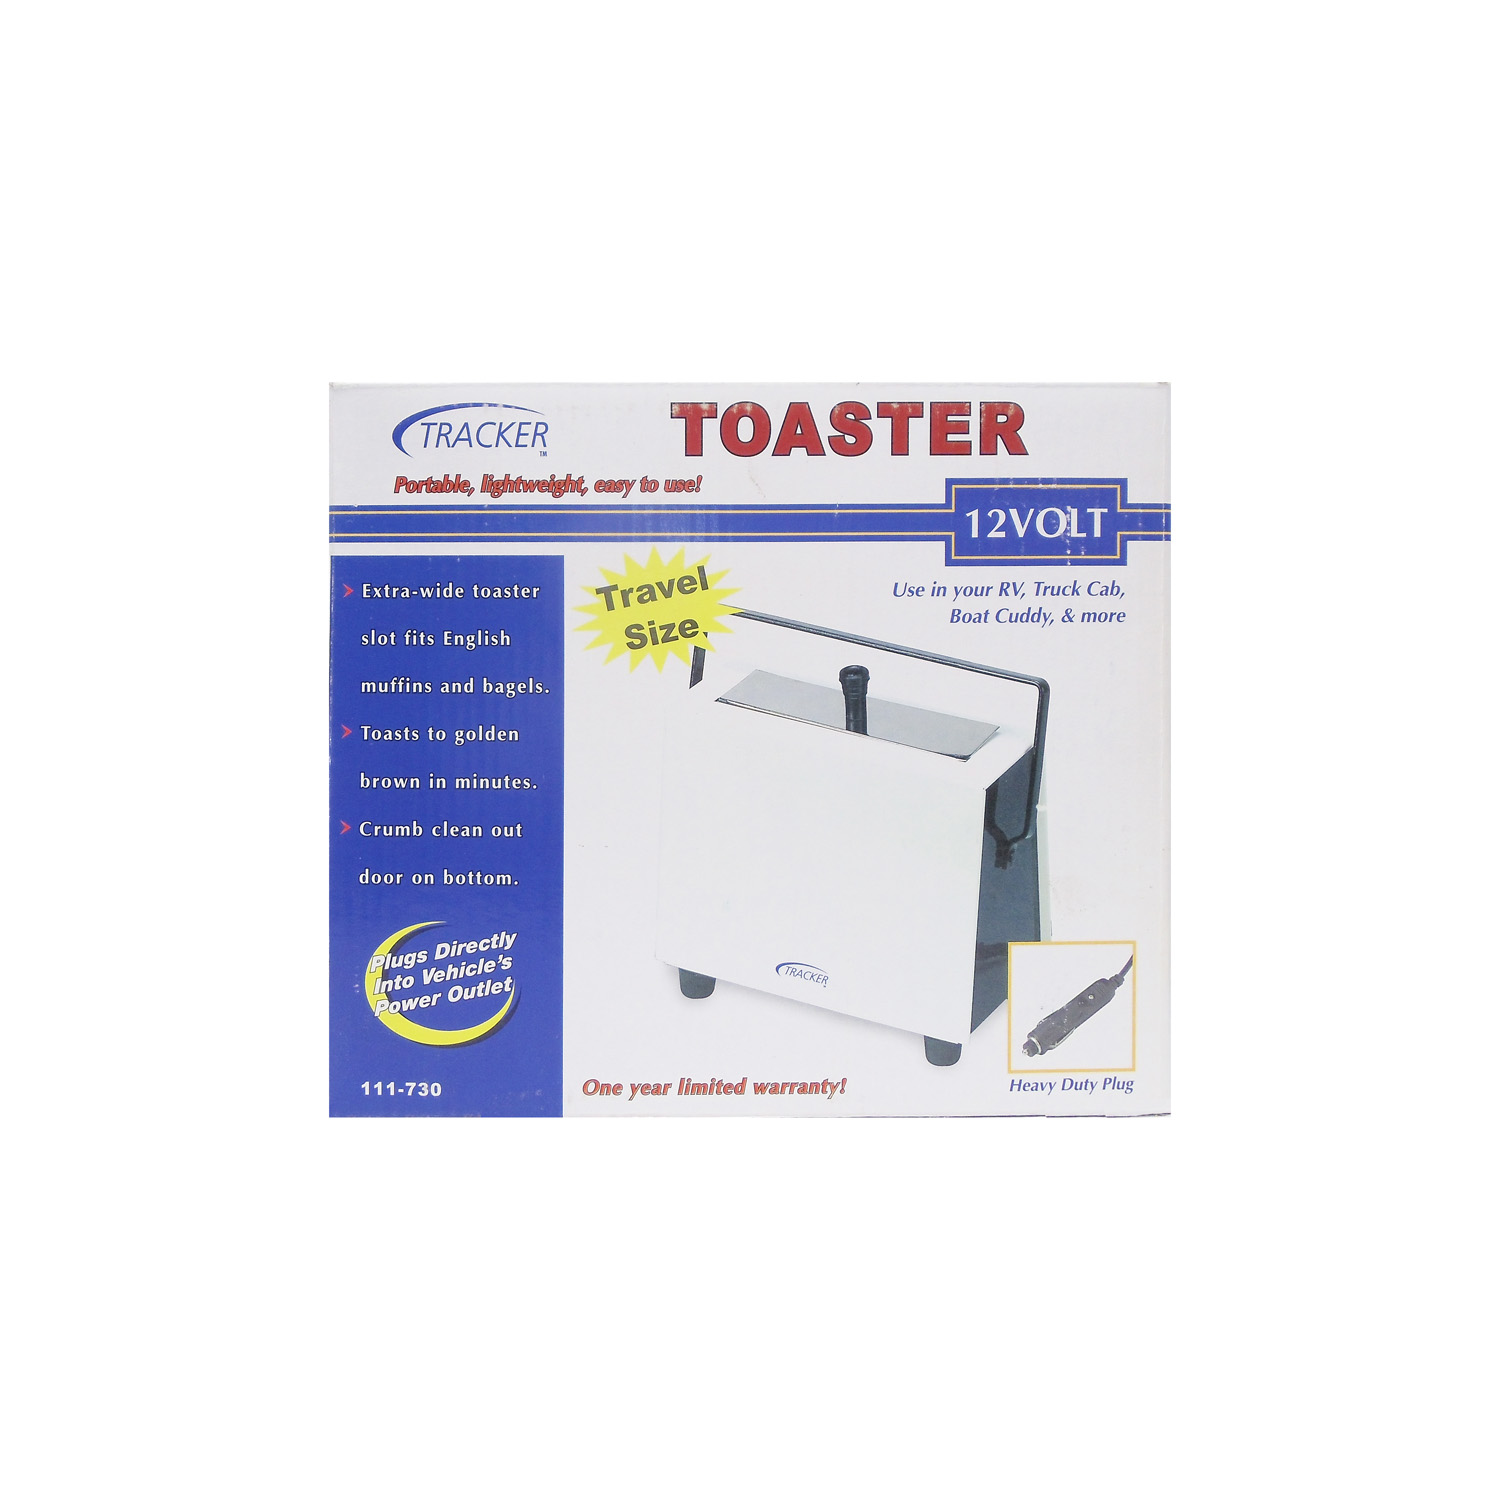 Toastmaster - 12 Volt Travel Size Toaster With Extra Wide Slot For Toasting Bread English Muffins & Bagels